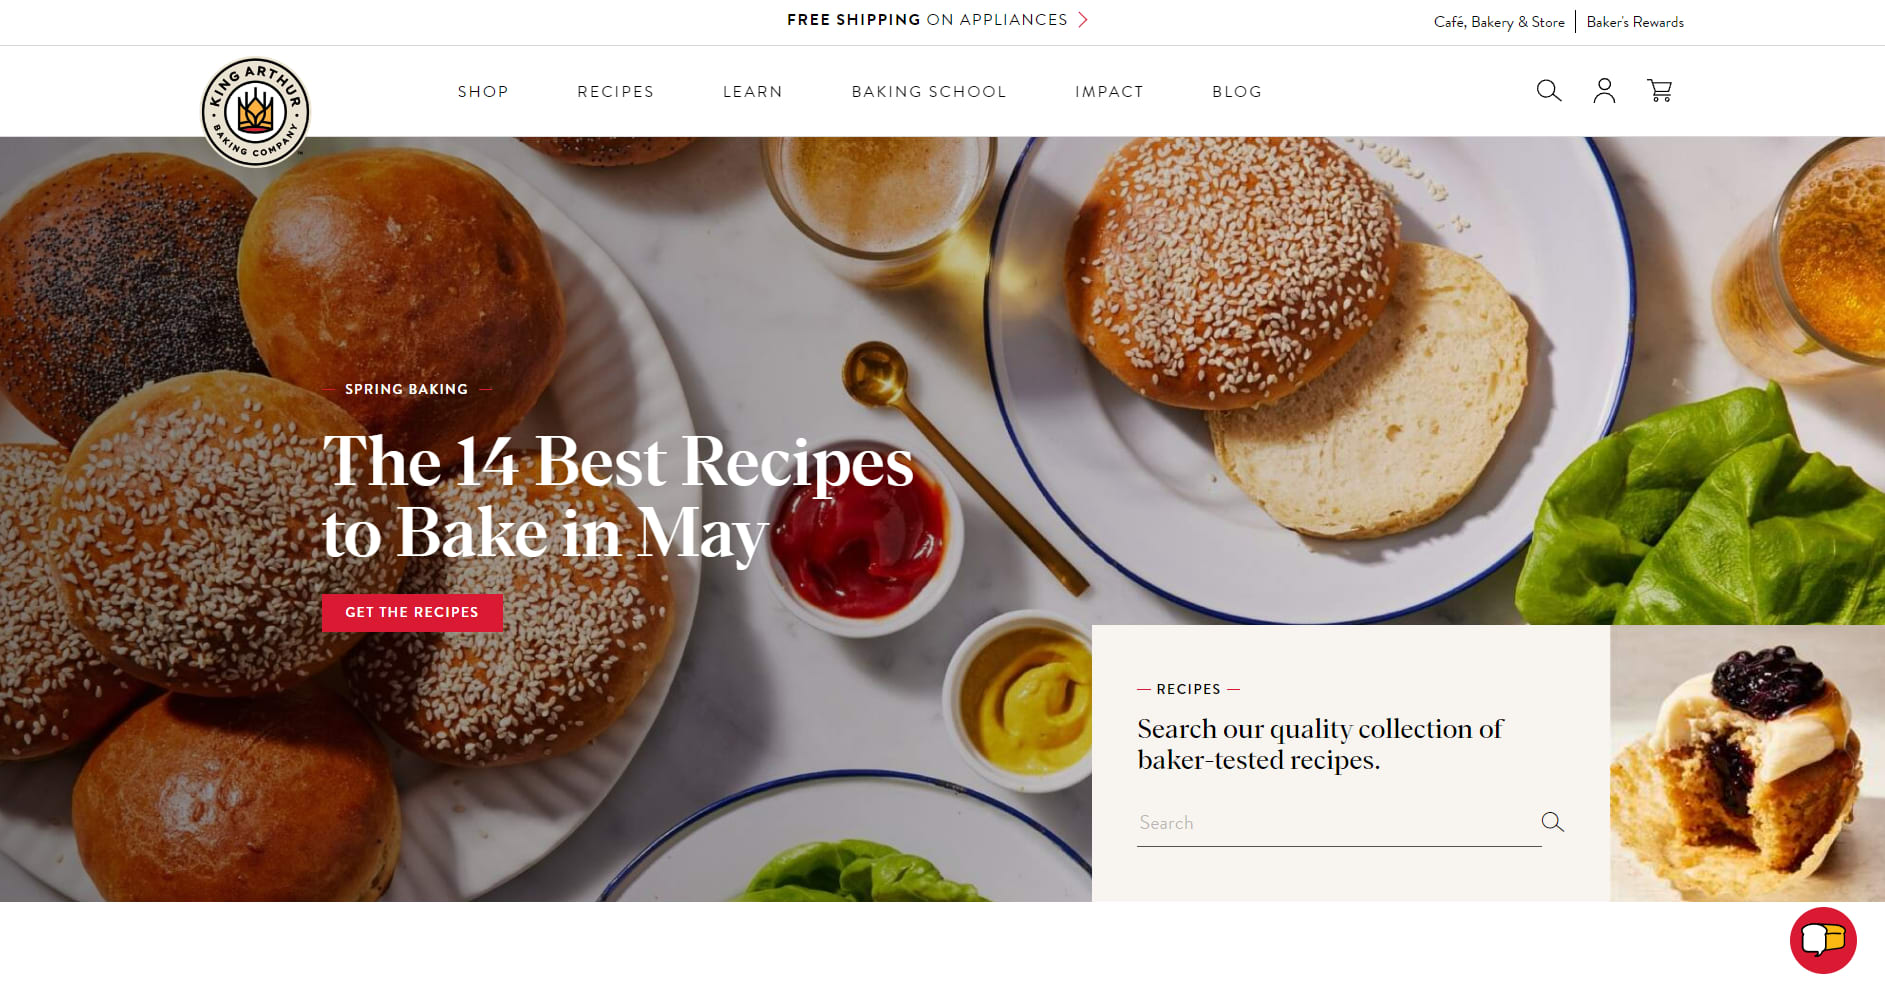 10 Stunning Ecommerce Website Examples to Inspire Your Design